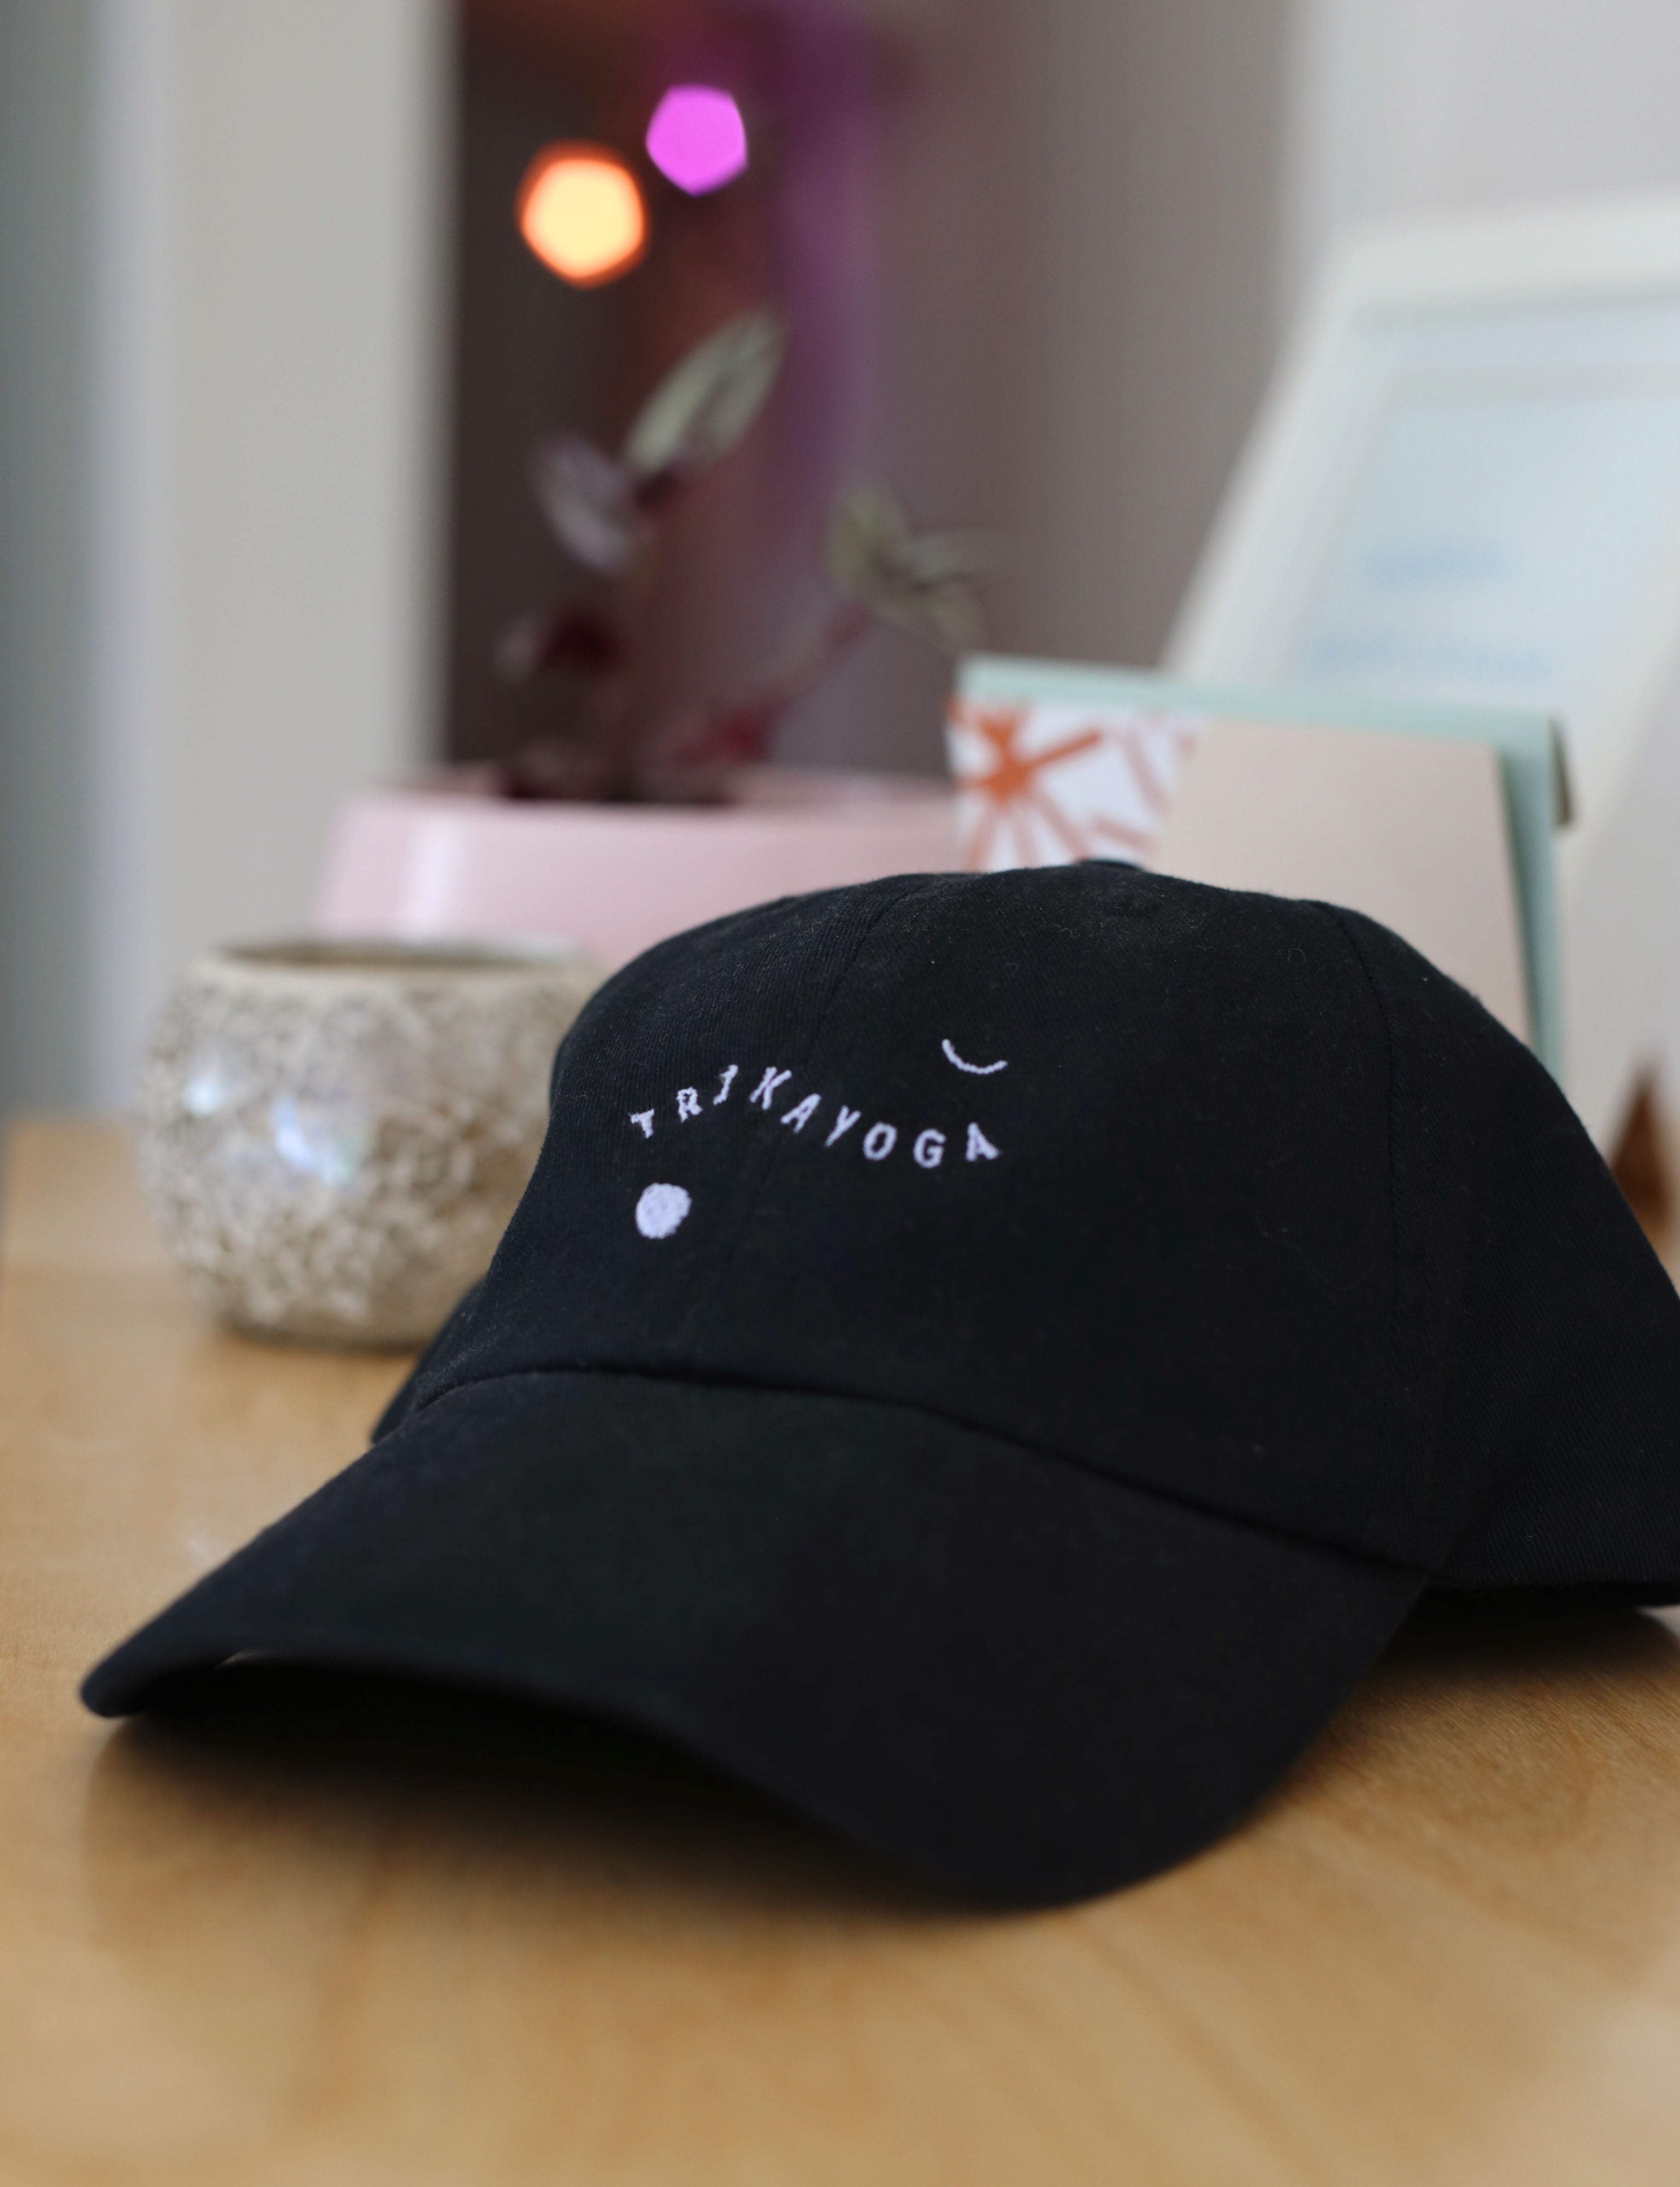 Trika Embroidered Caps